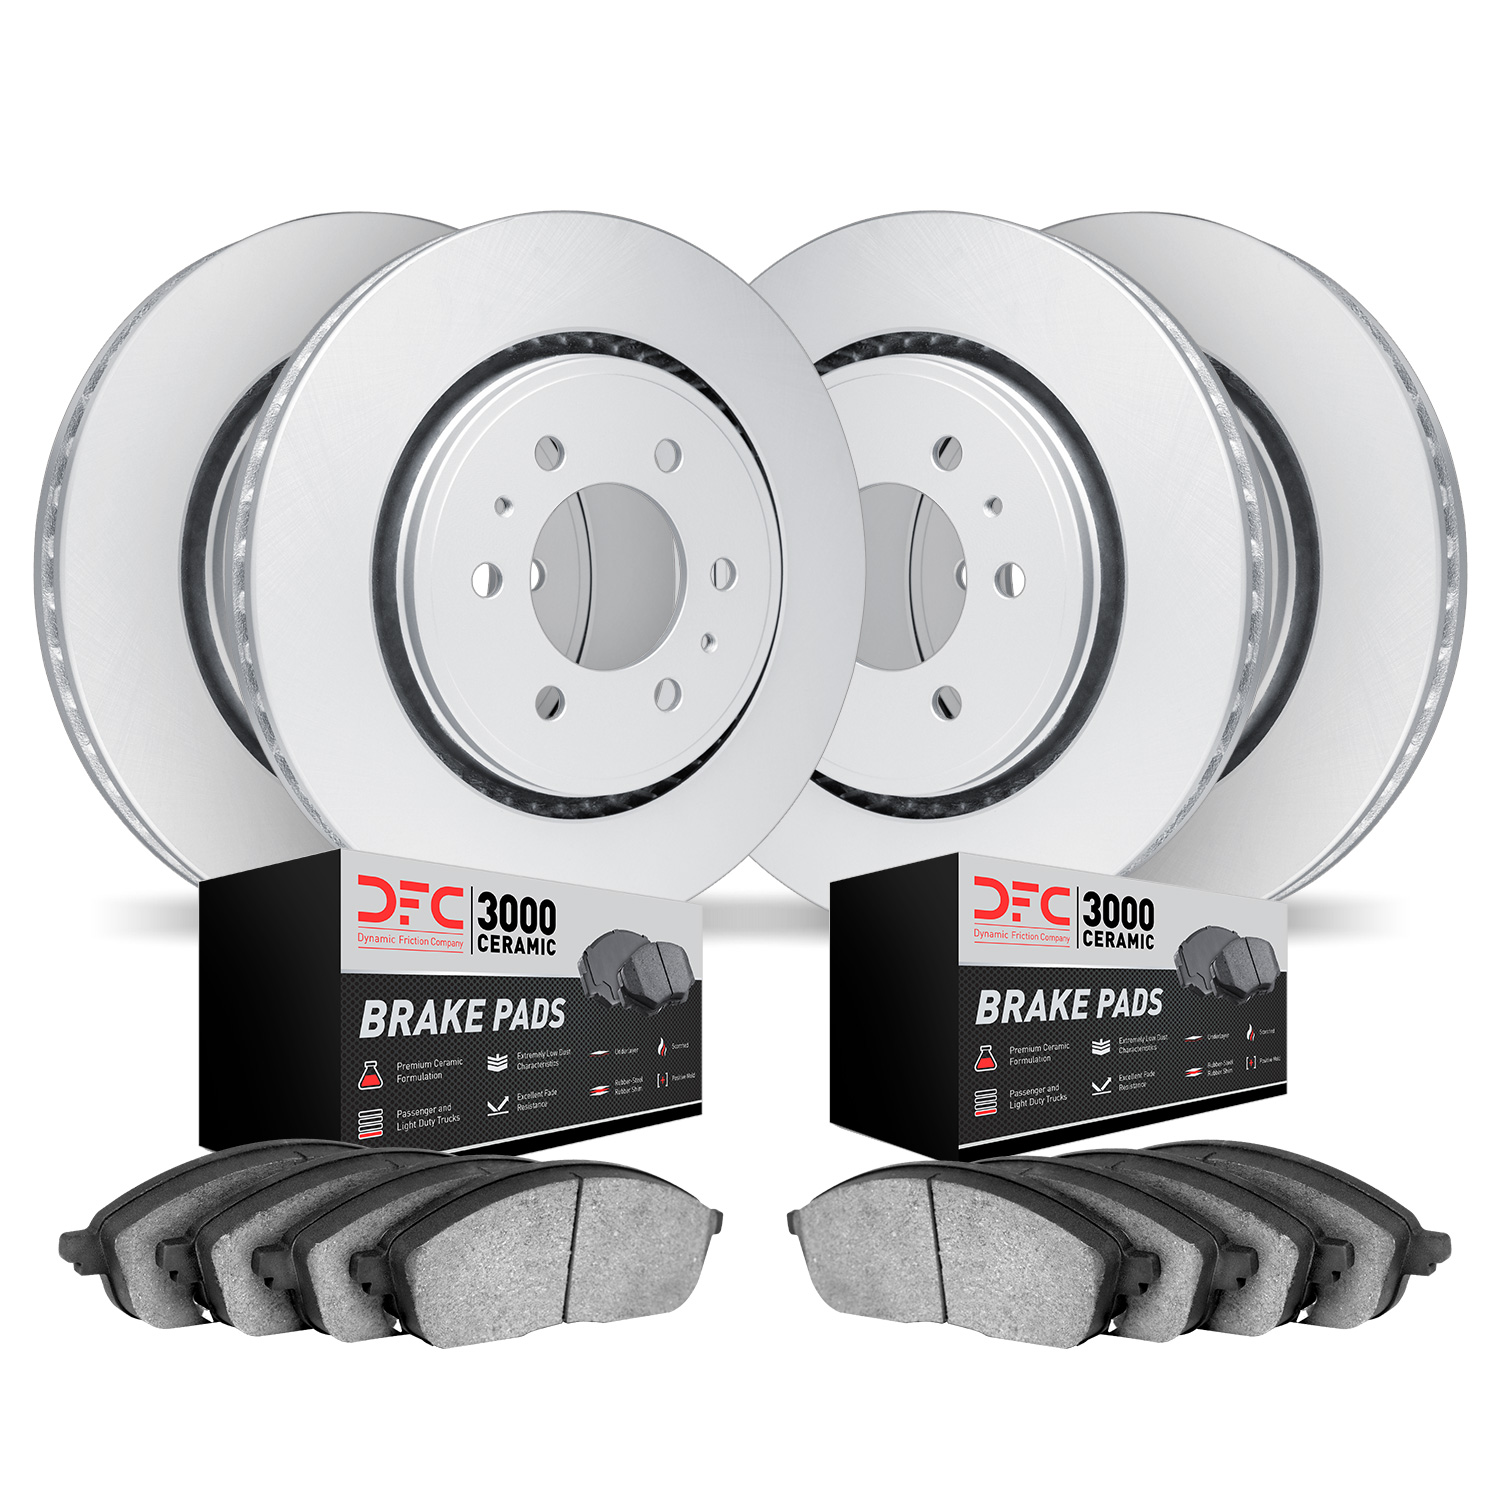 4304-76035 Geospec Brake Rotors with 3000-Series Ceramic Brake Pads Kit, 2001-2007 Lexus/Toyota/Scion, Position: Front and Rear